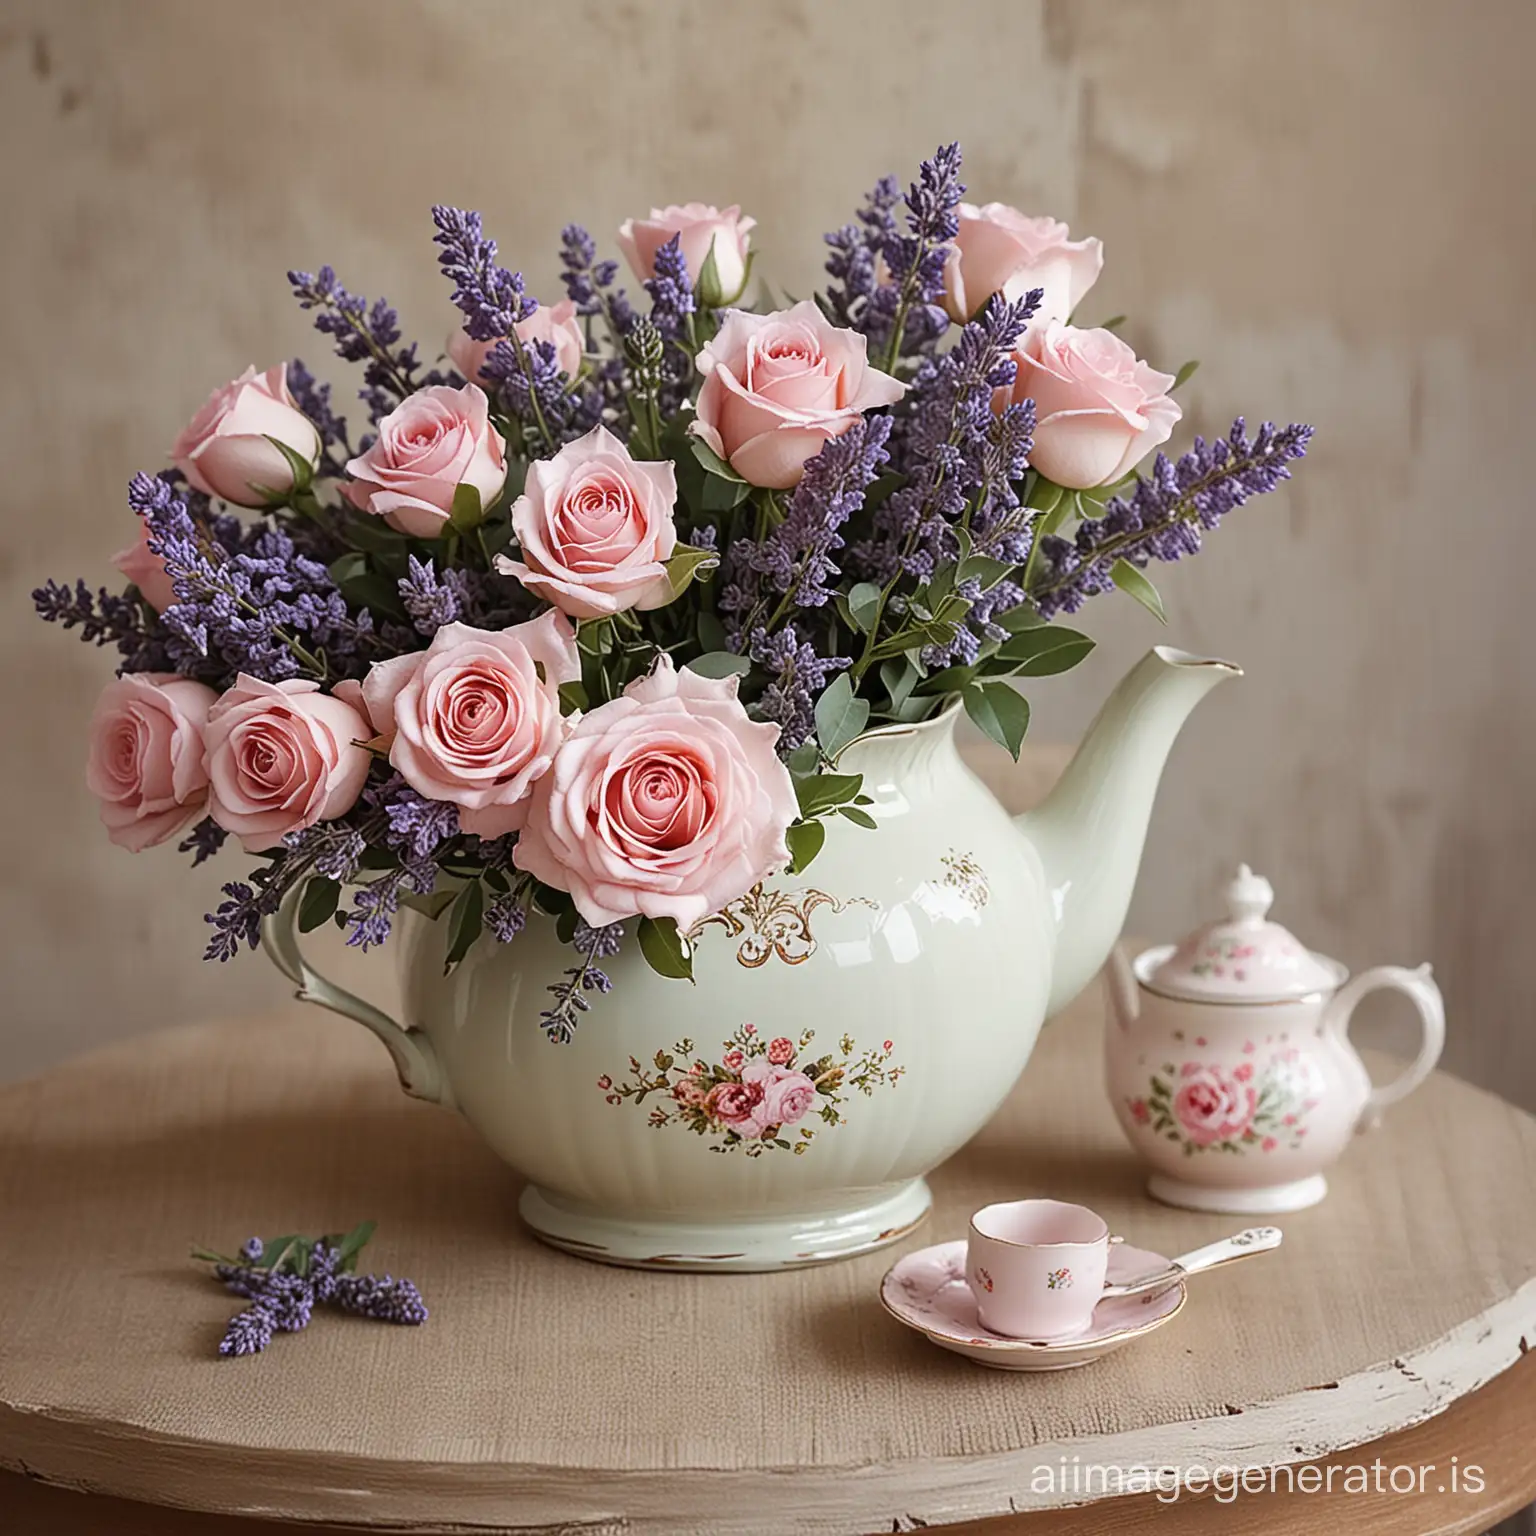 Vintage-Teapot-Centerpiece-with-Lavender-and-Roses